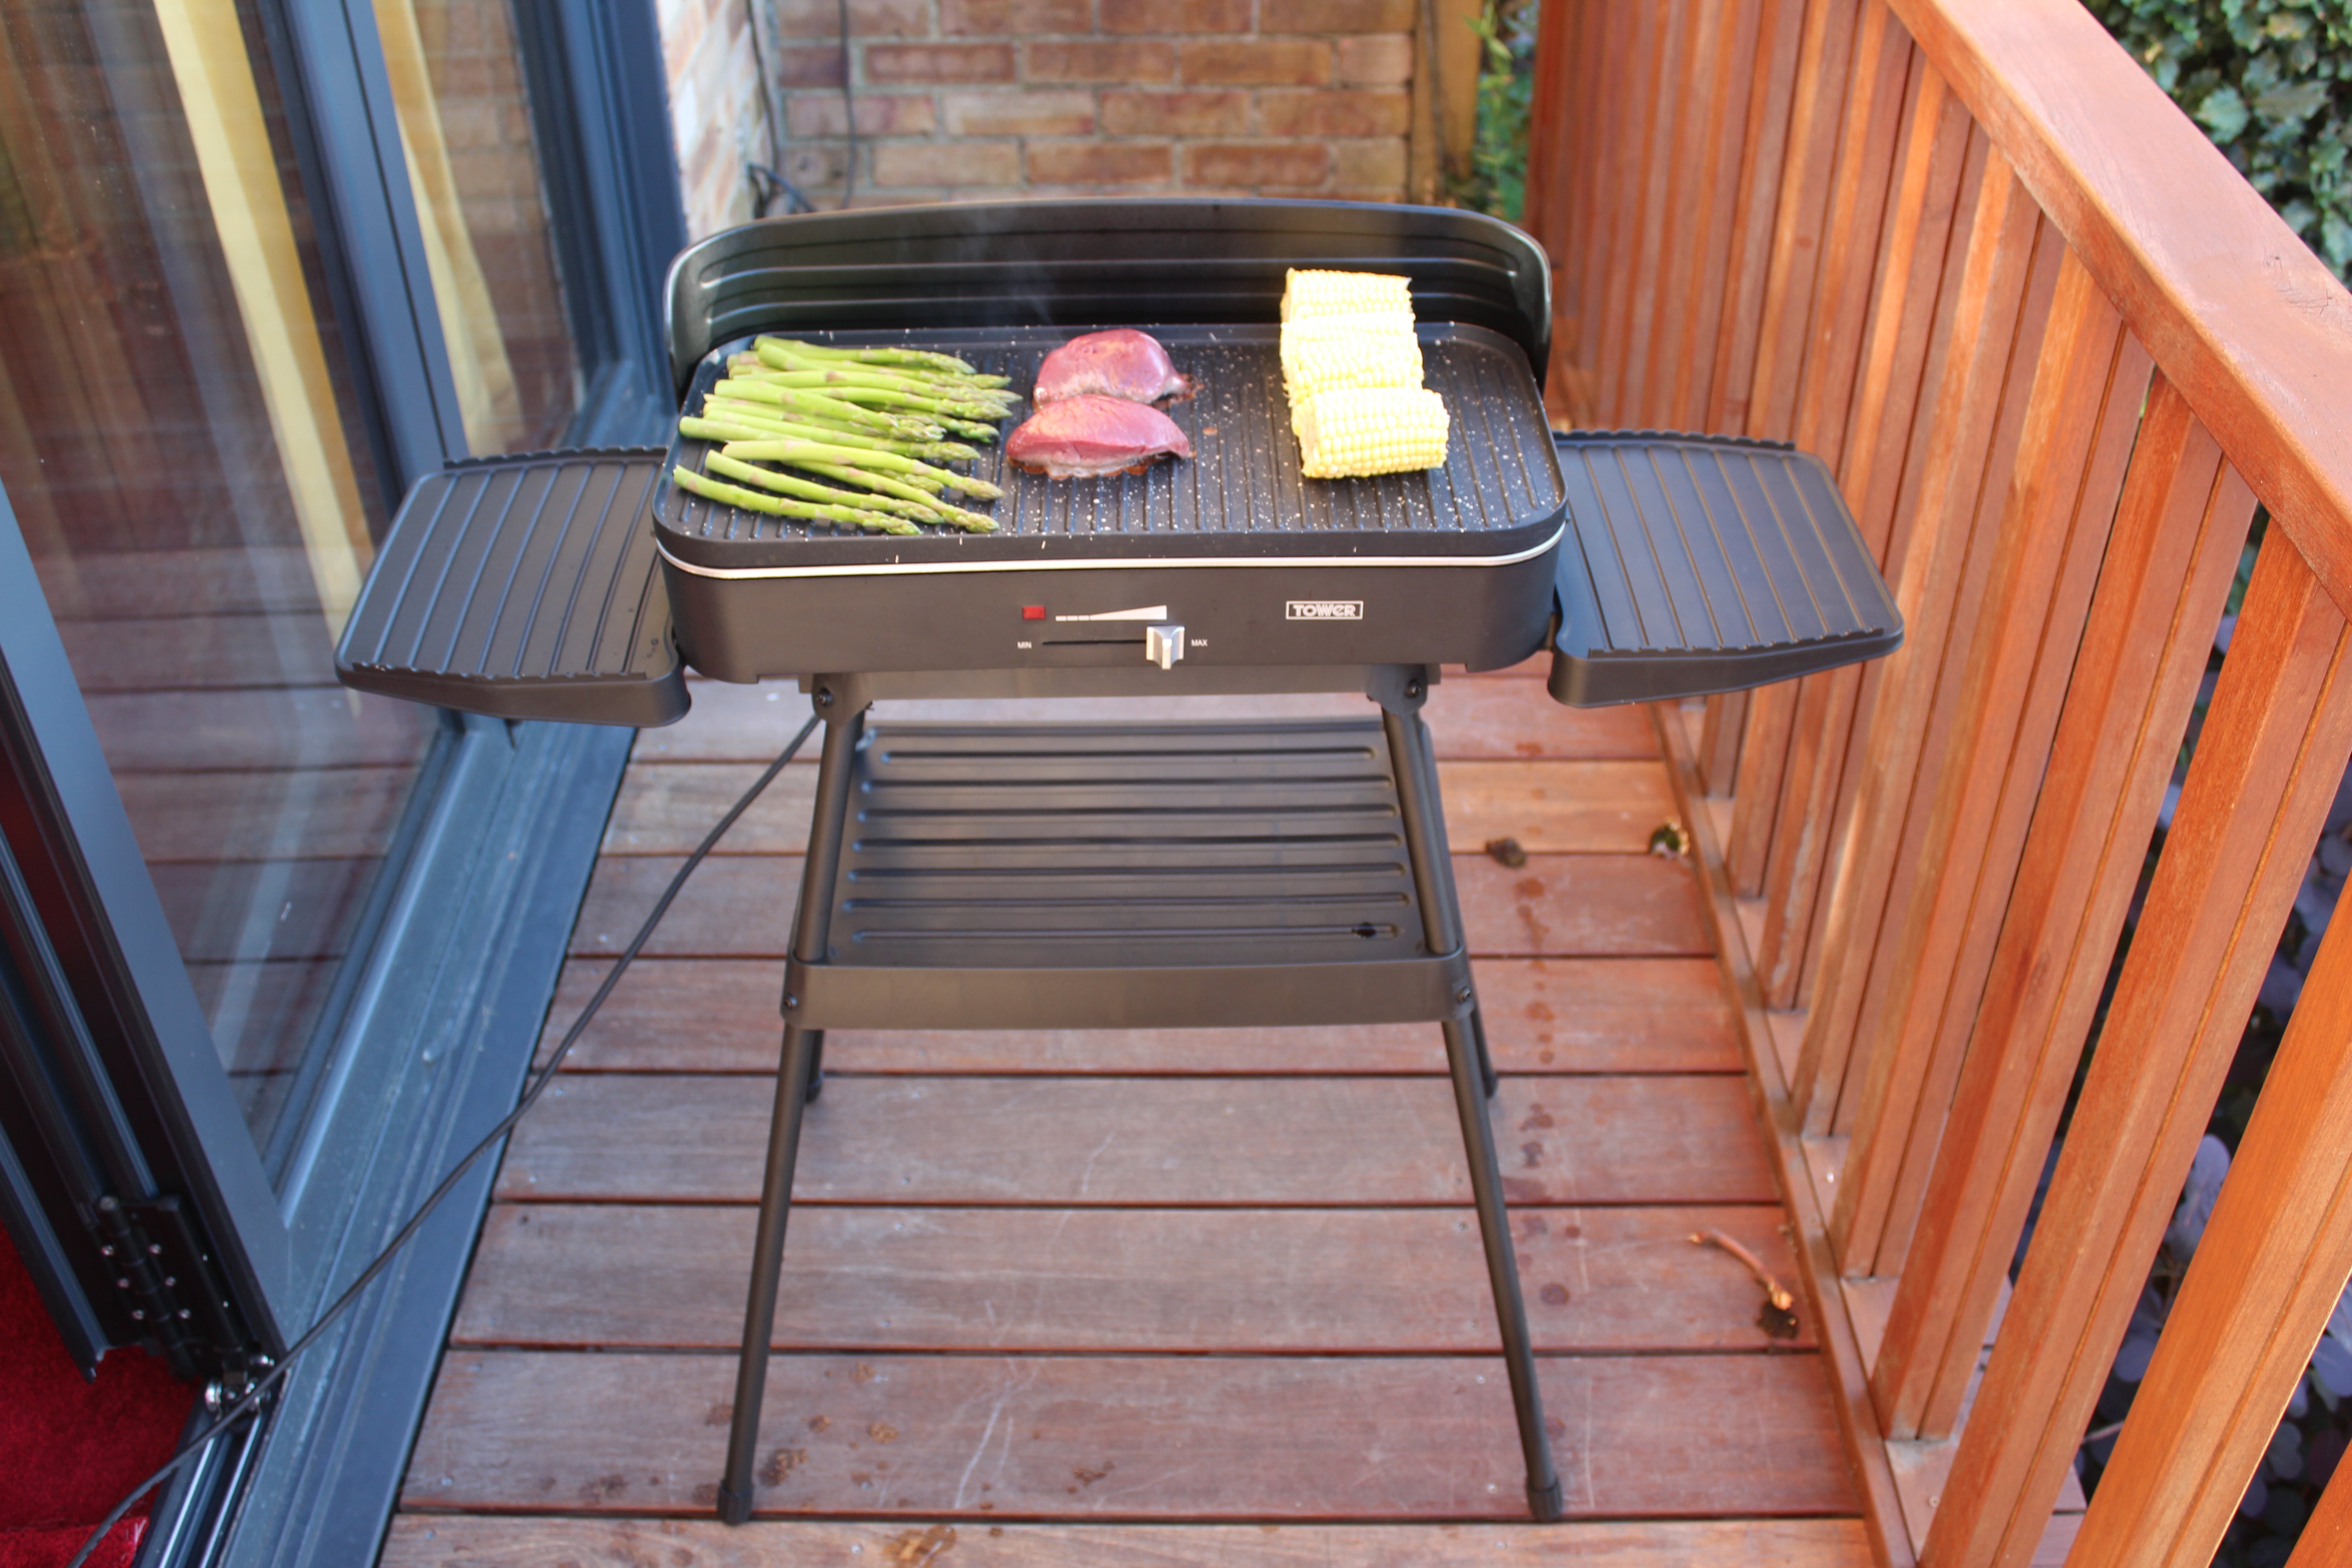 Front top view of a black Tower T14028 with stand standing on floor with different food items being grilled on it